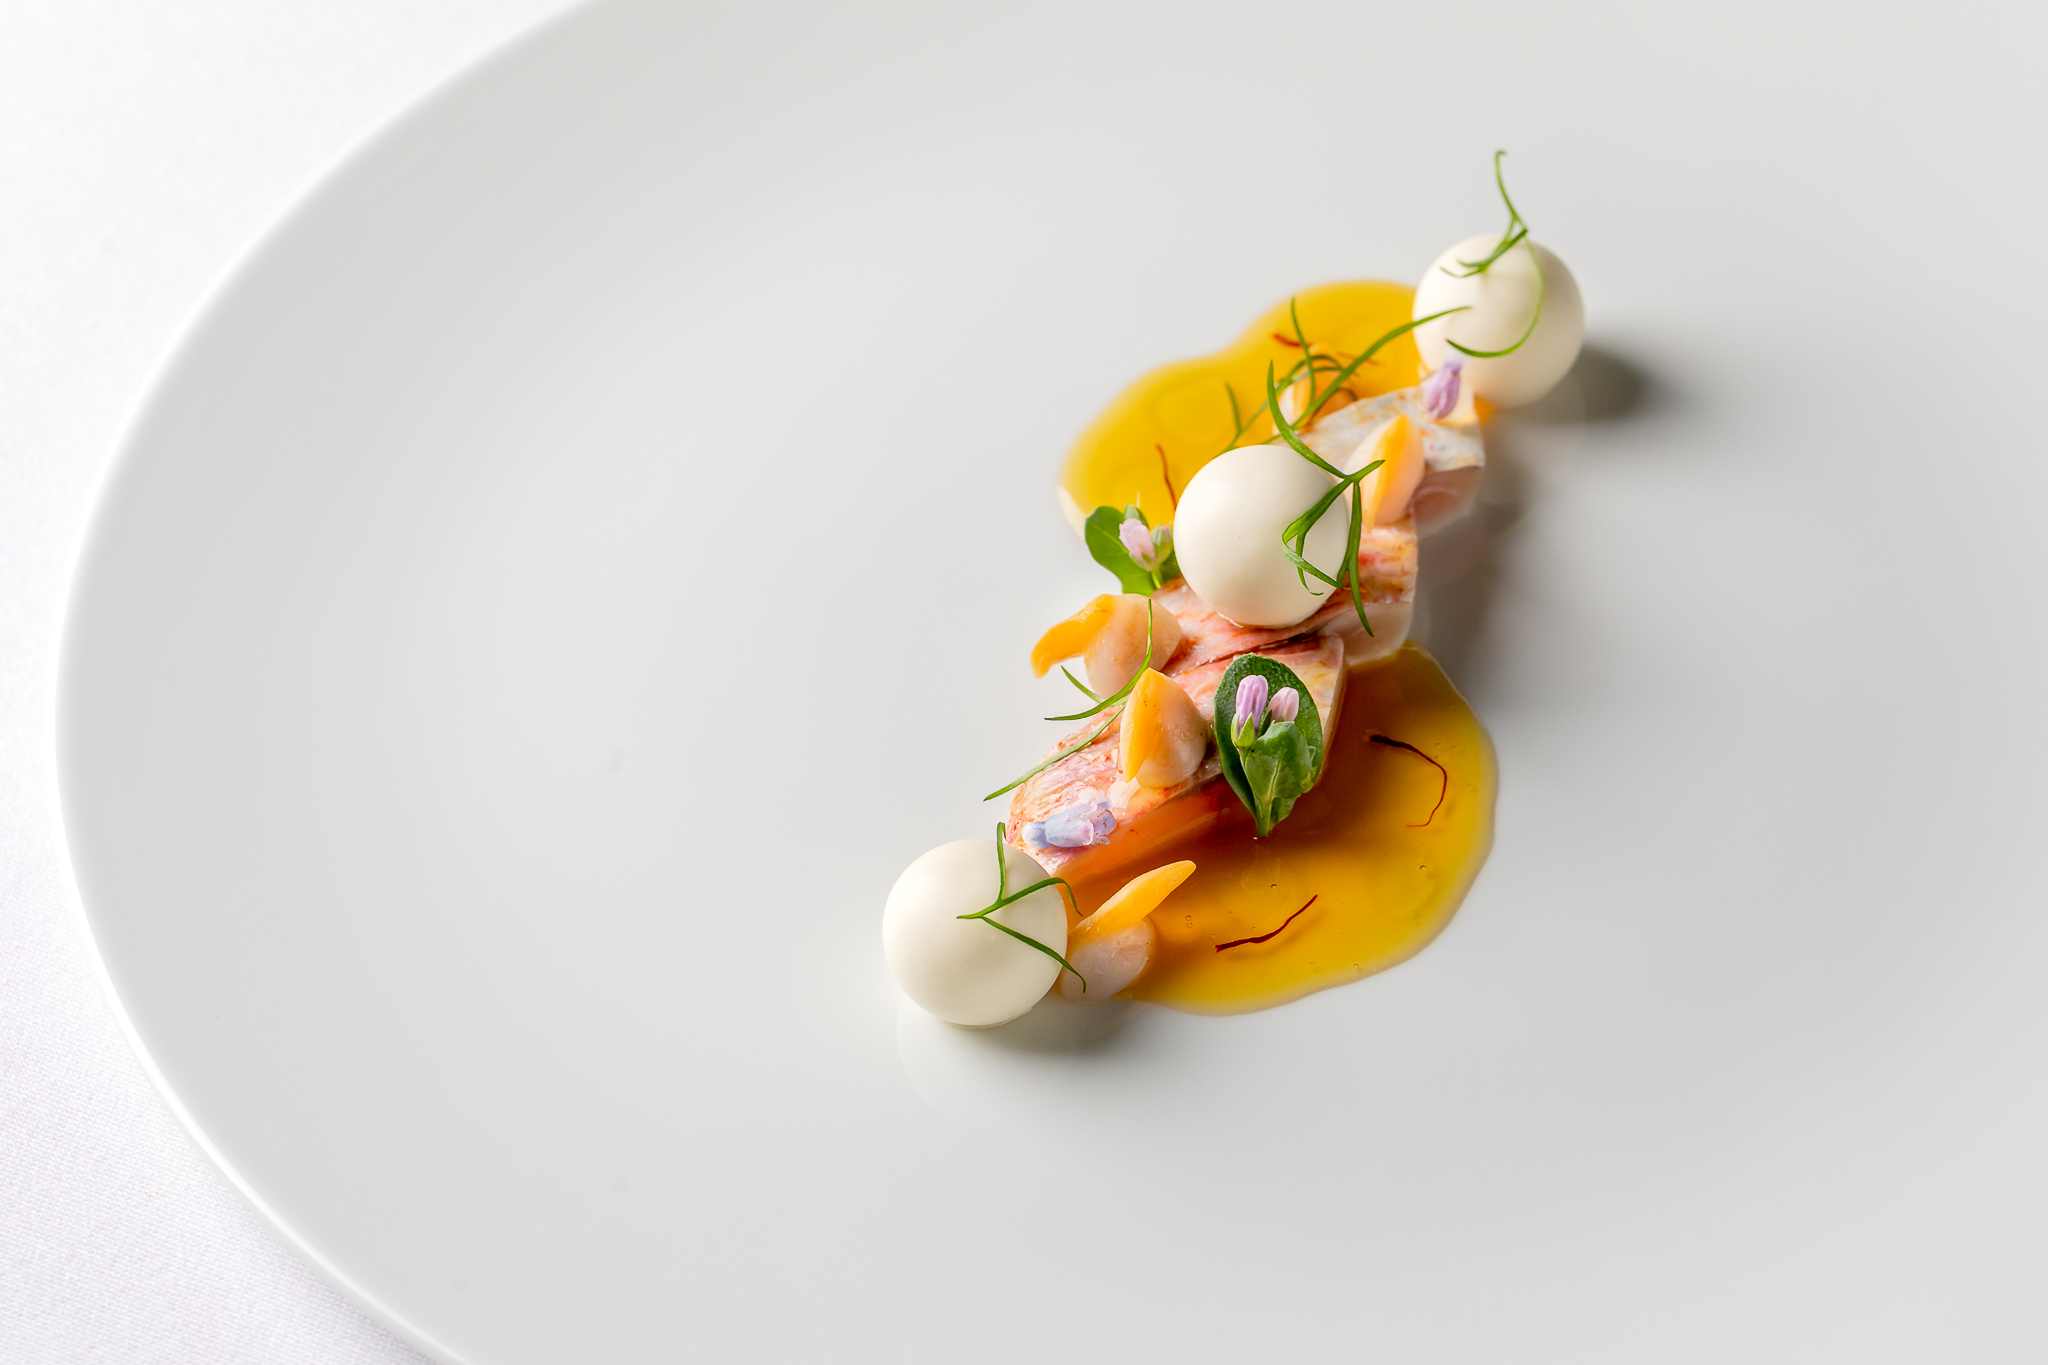 Escabeche of red mullet with bouillabaisse consomme Cafe Royal. Credit: Justin De Souza